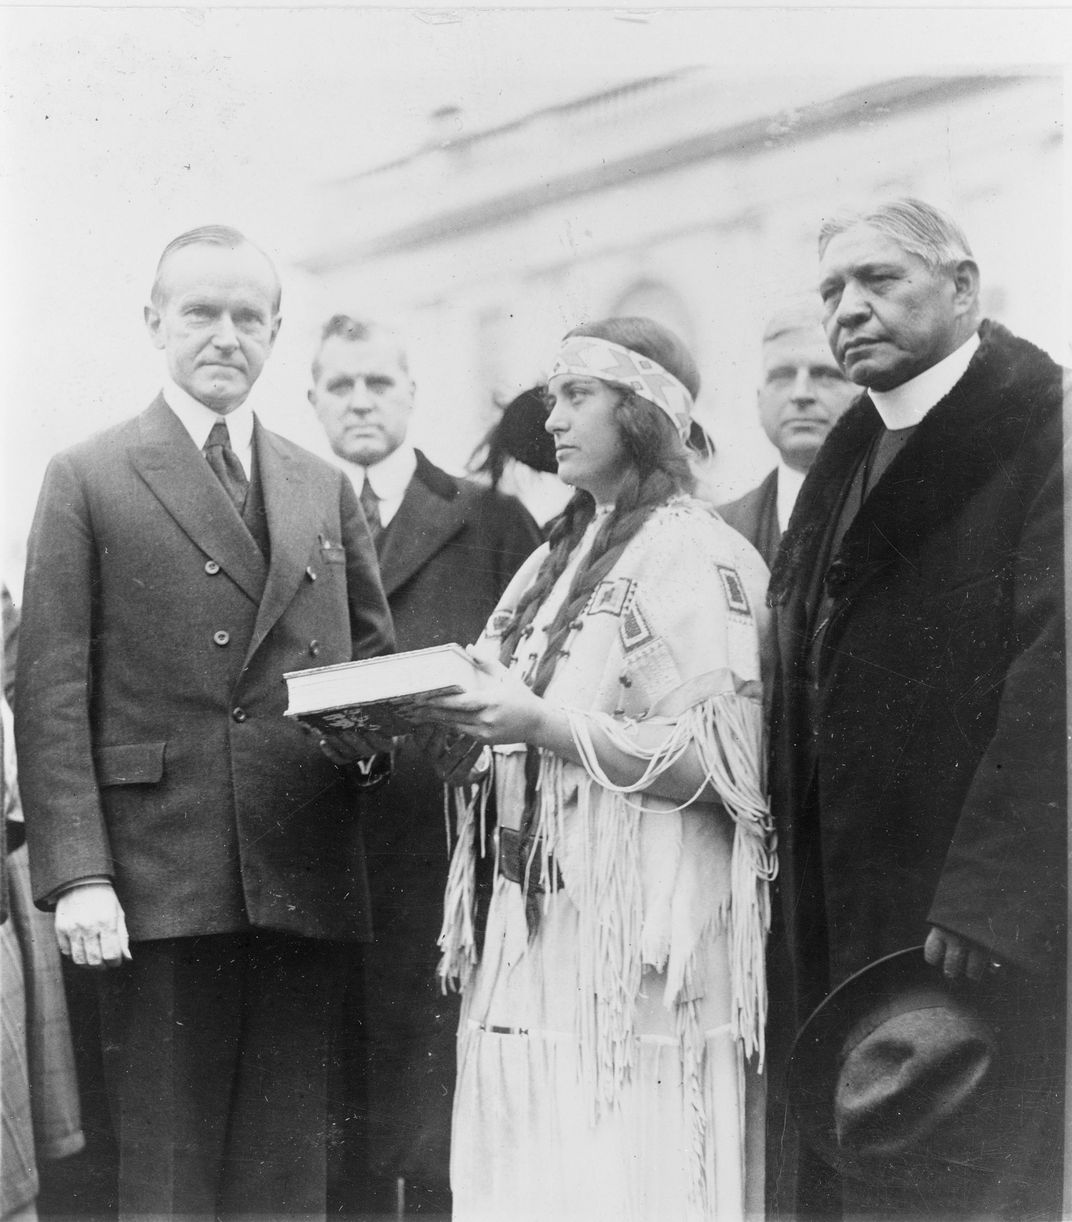 Ruth Muskrat presents a book to Coolidge in December 1923.